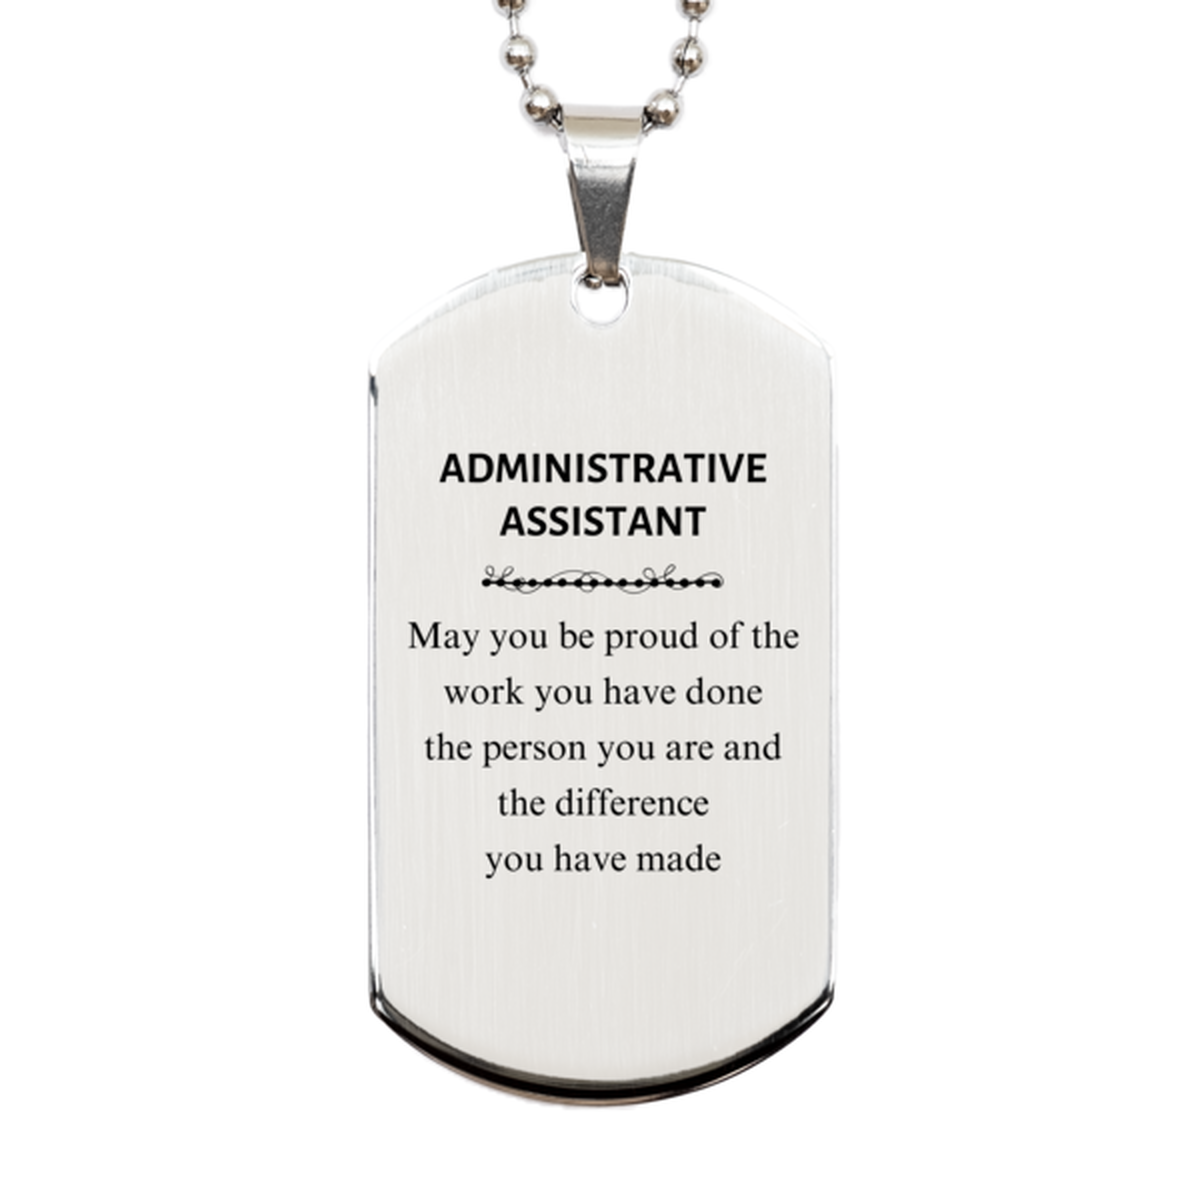 Administrative Assistant May you be proud of the work you have done, Retirement Administrative Assistant Silver Dog Tag for Colleague Appreciation Gifts Amazing for Administrative Assistant